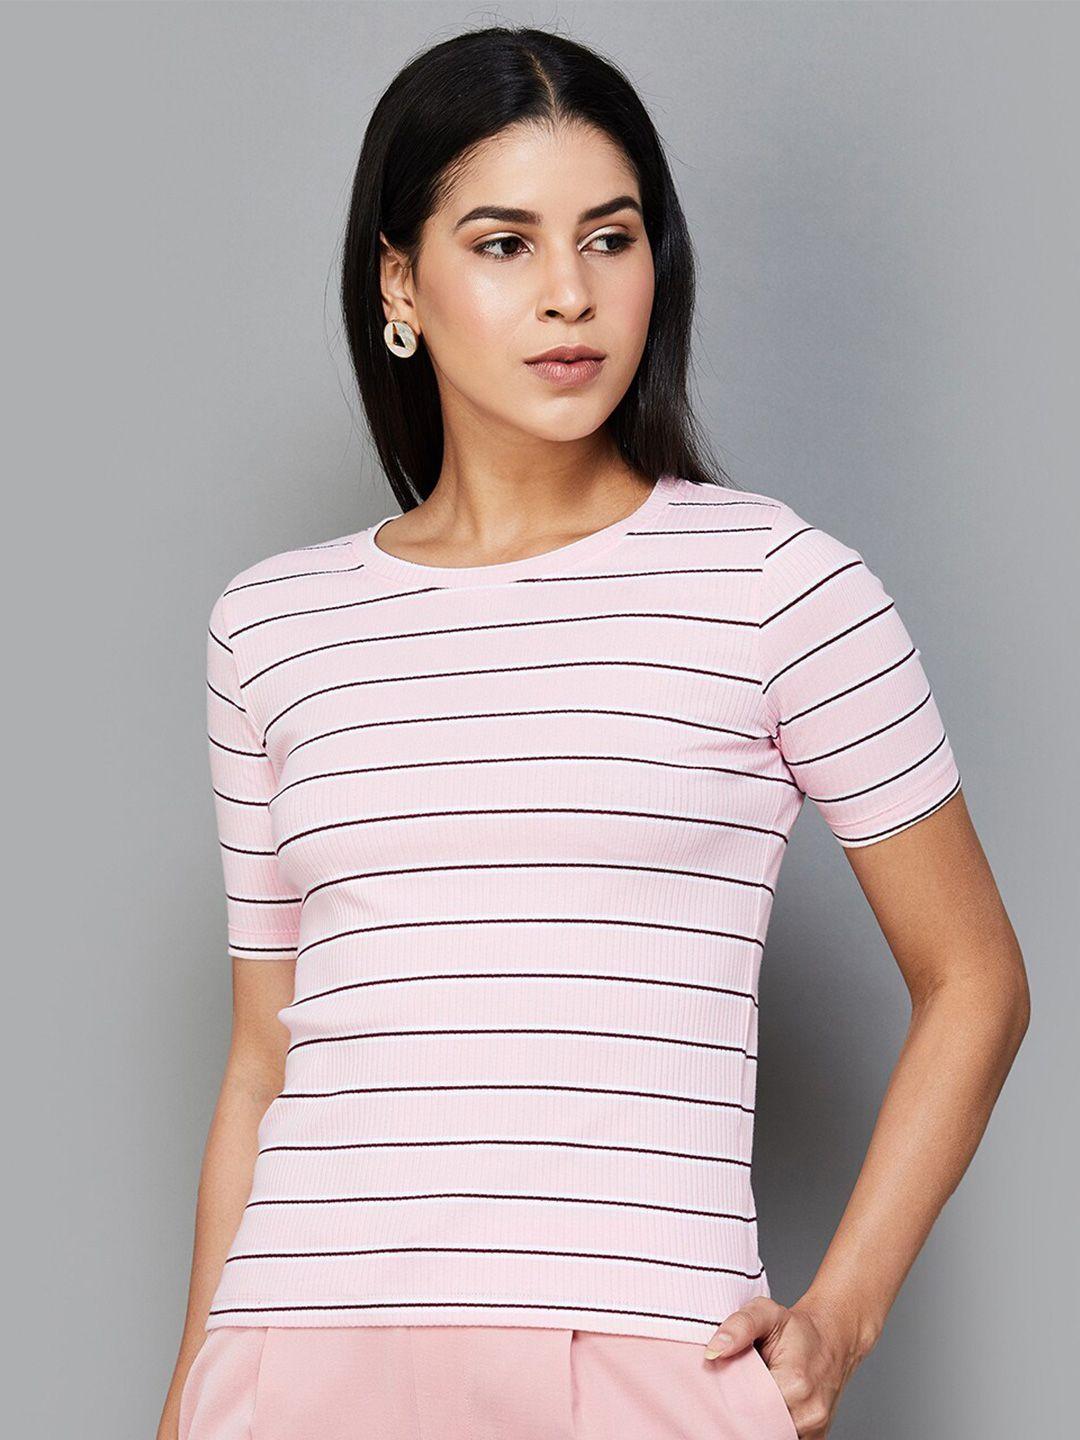 code by lifestyle striped cotton top